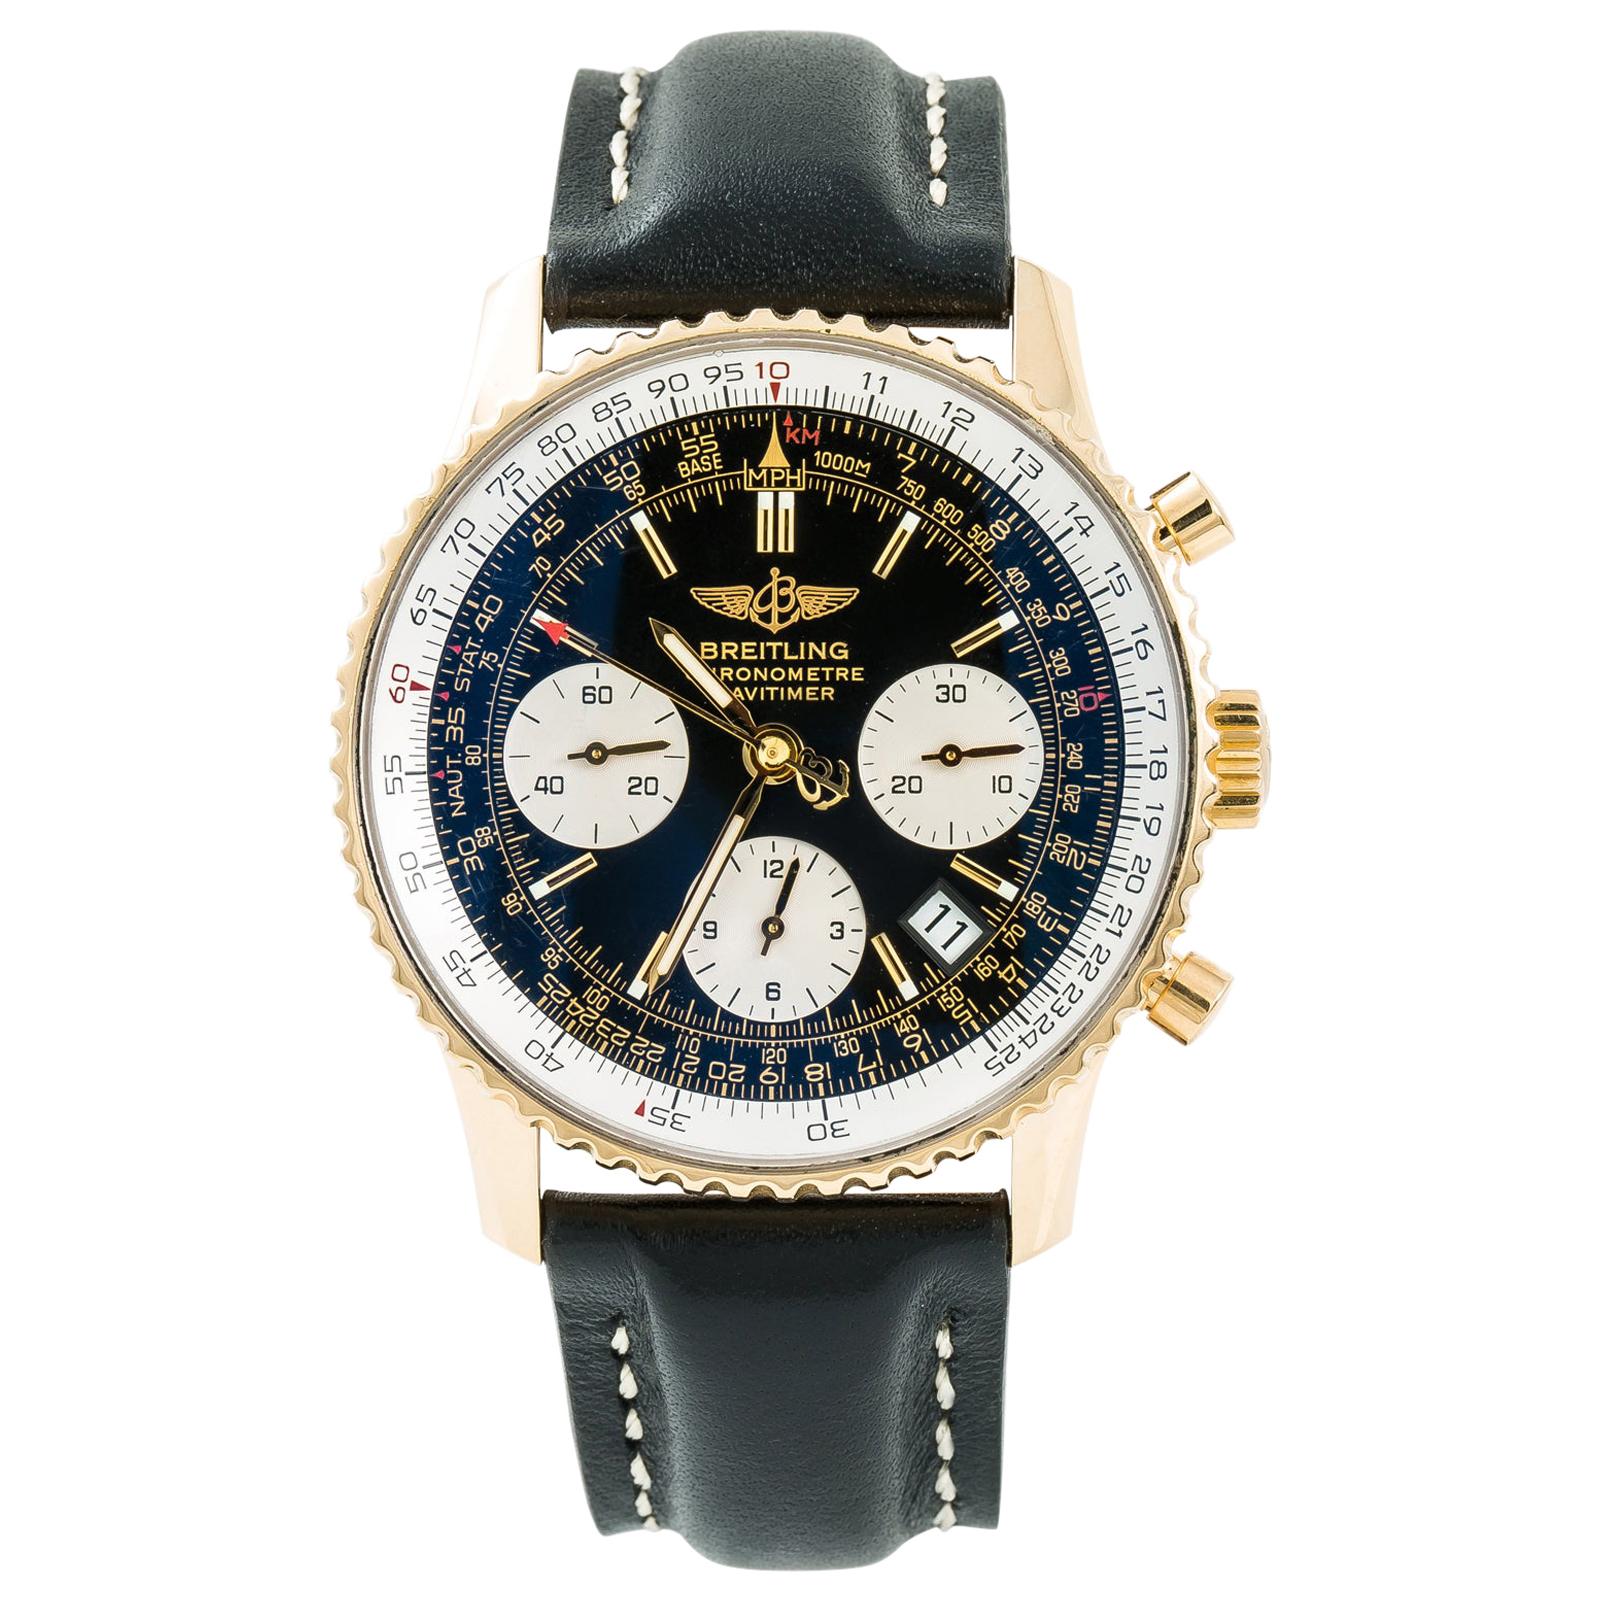 Breitling Navitimer K23322 Mens Automatic Watch Chronograph 18K YG For Sale